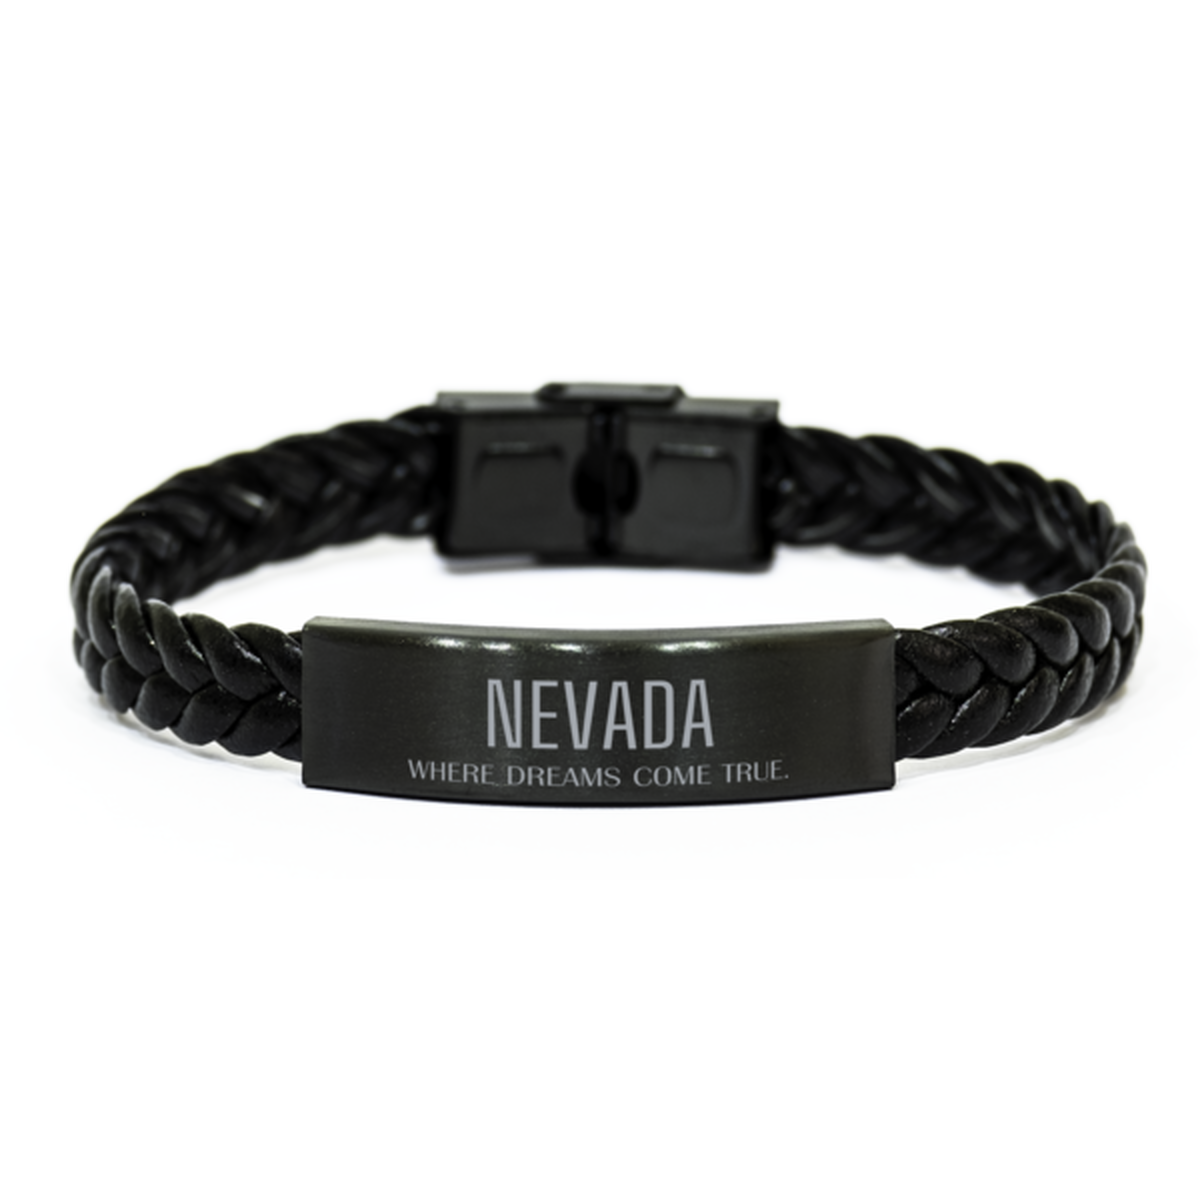 Love Nevada State Braided Leather Bracelet, Nevada Where dreams come true, Birthday Inspirational Gifts For Nevada Men, Women, Friends